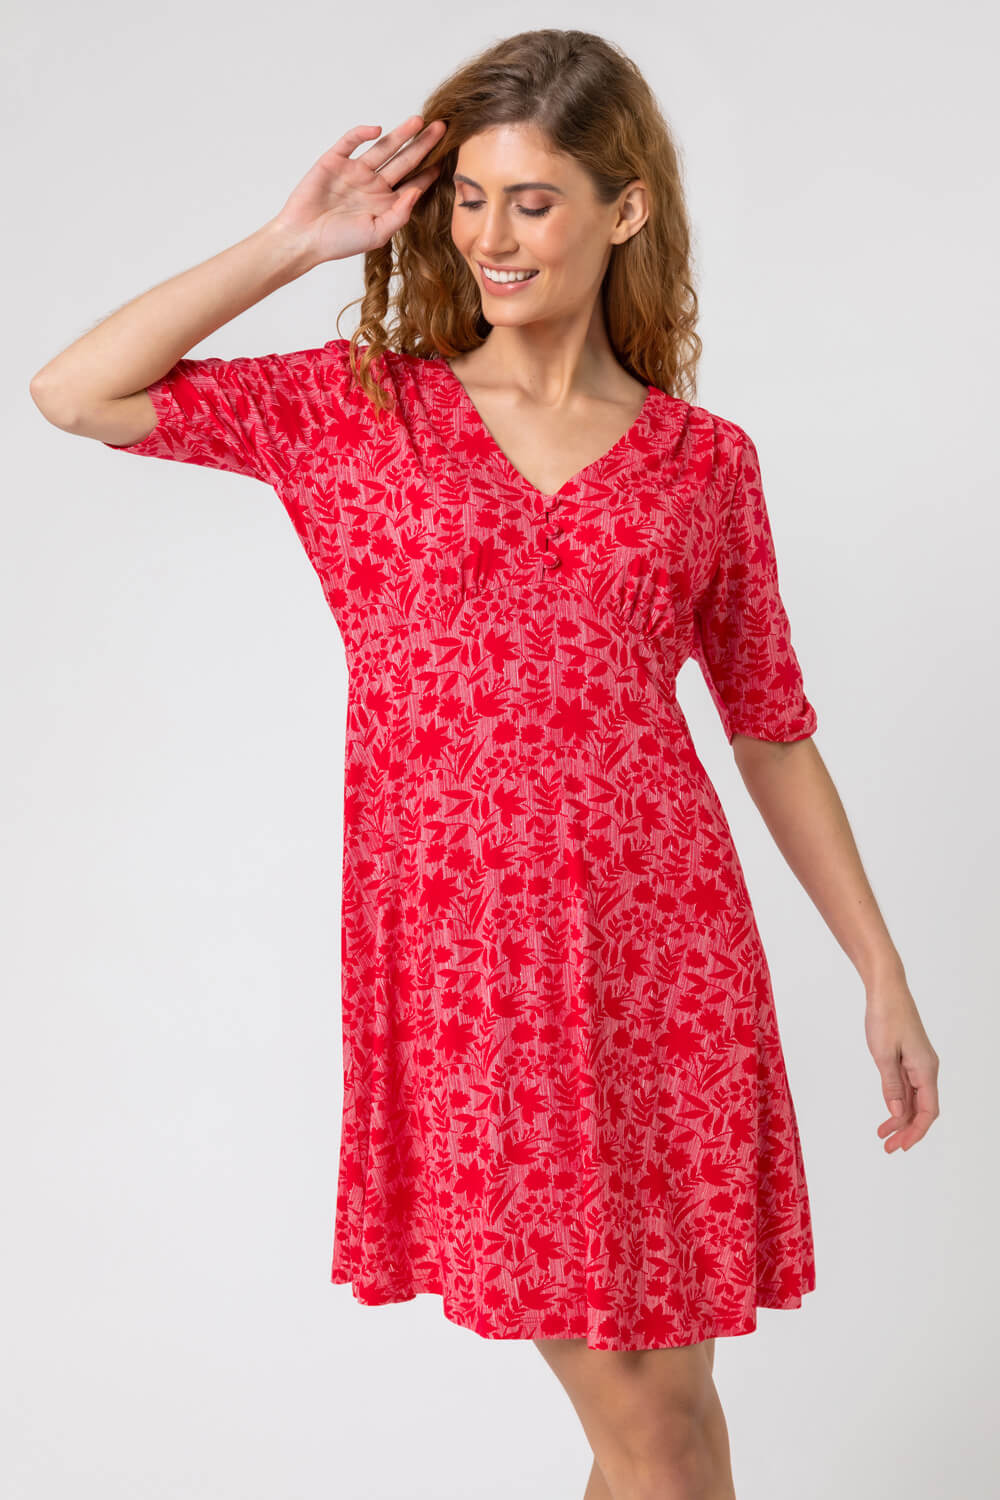 Red Floral Print Buttoned Tea Dress, Image 4 of 5